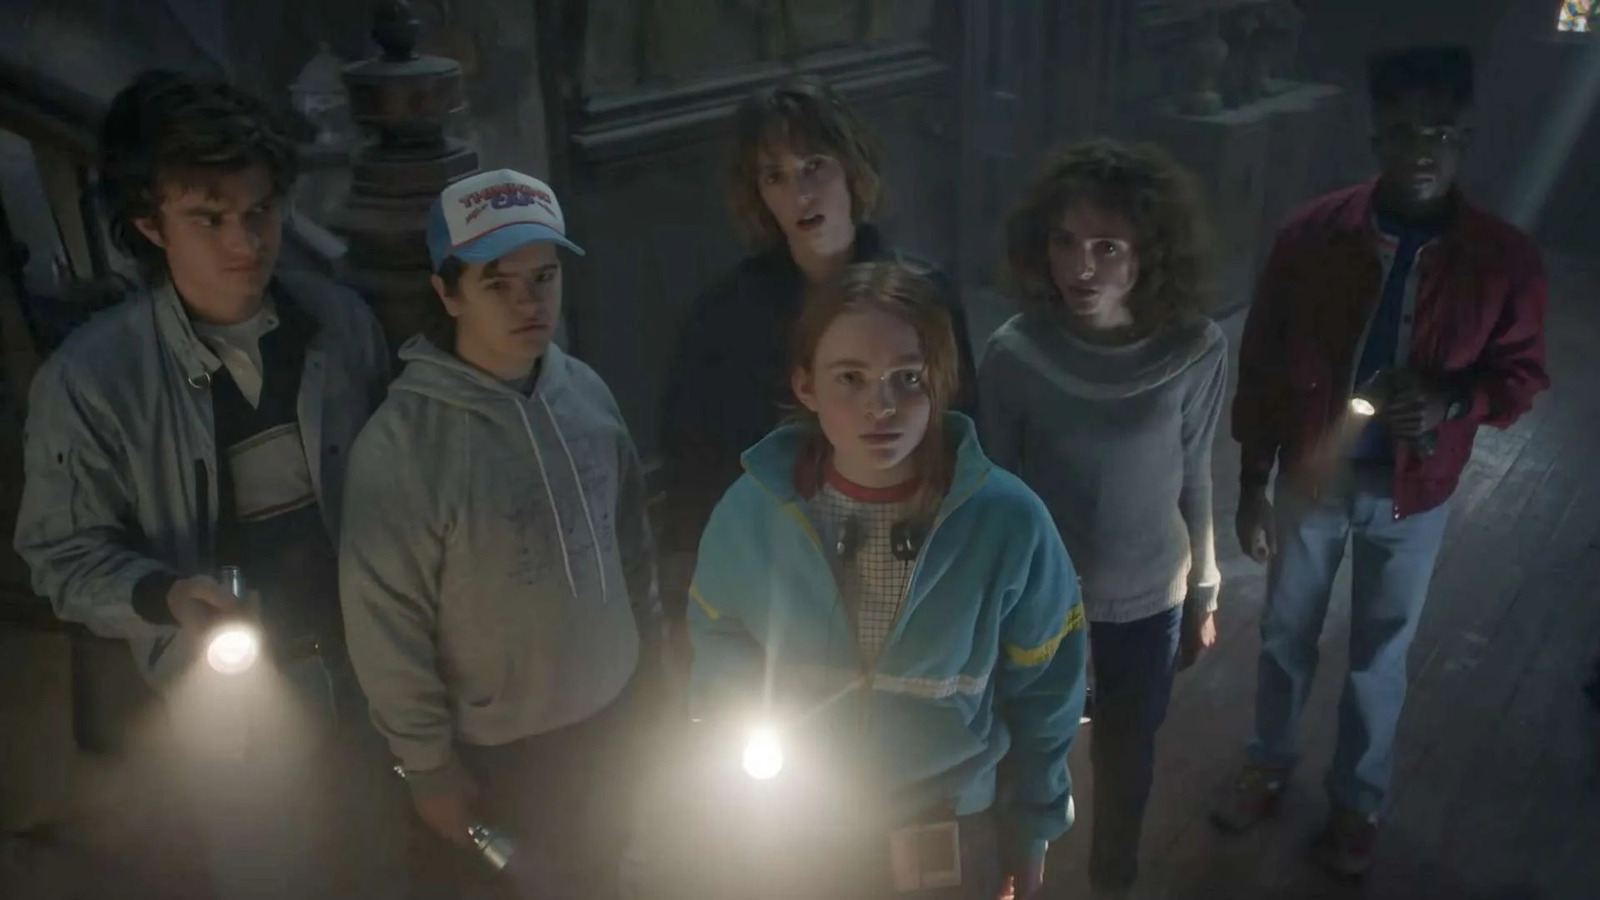 #The Final Episodes Of Stranger Things Season 4 Promise A ‘Mad Symphony Of Chaos’